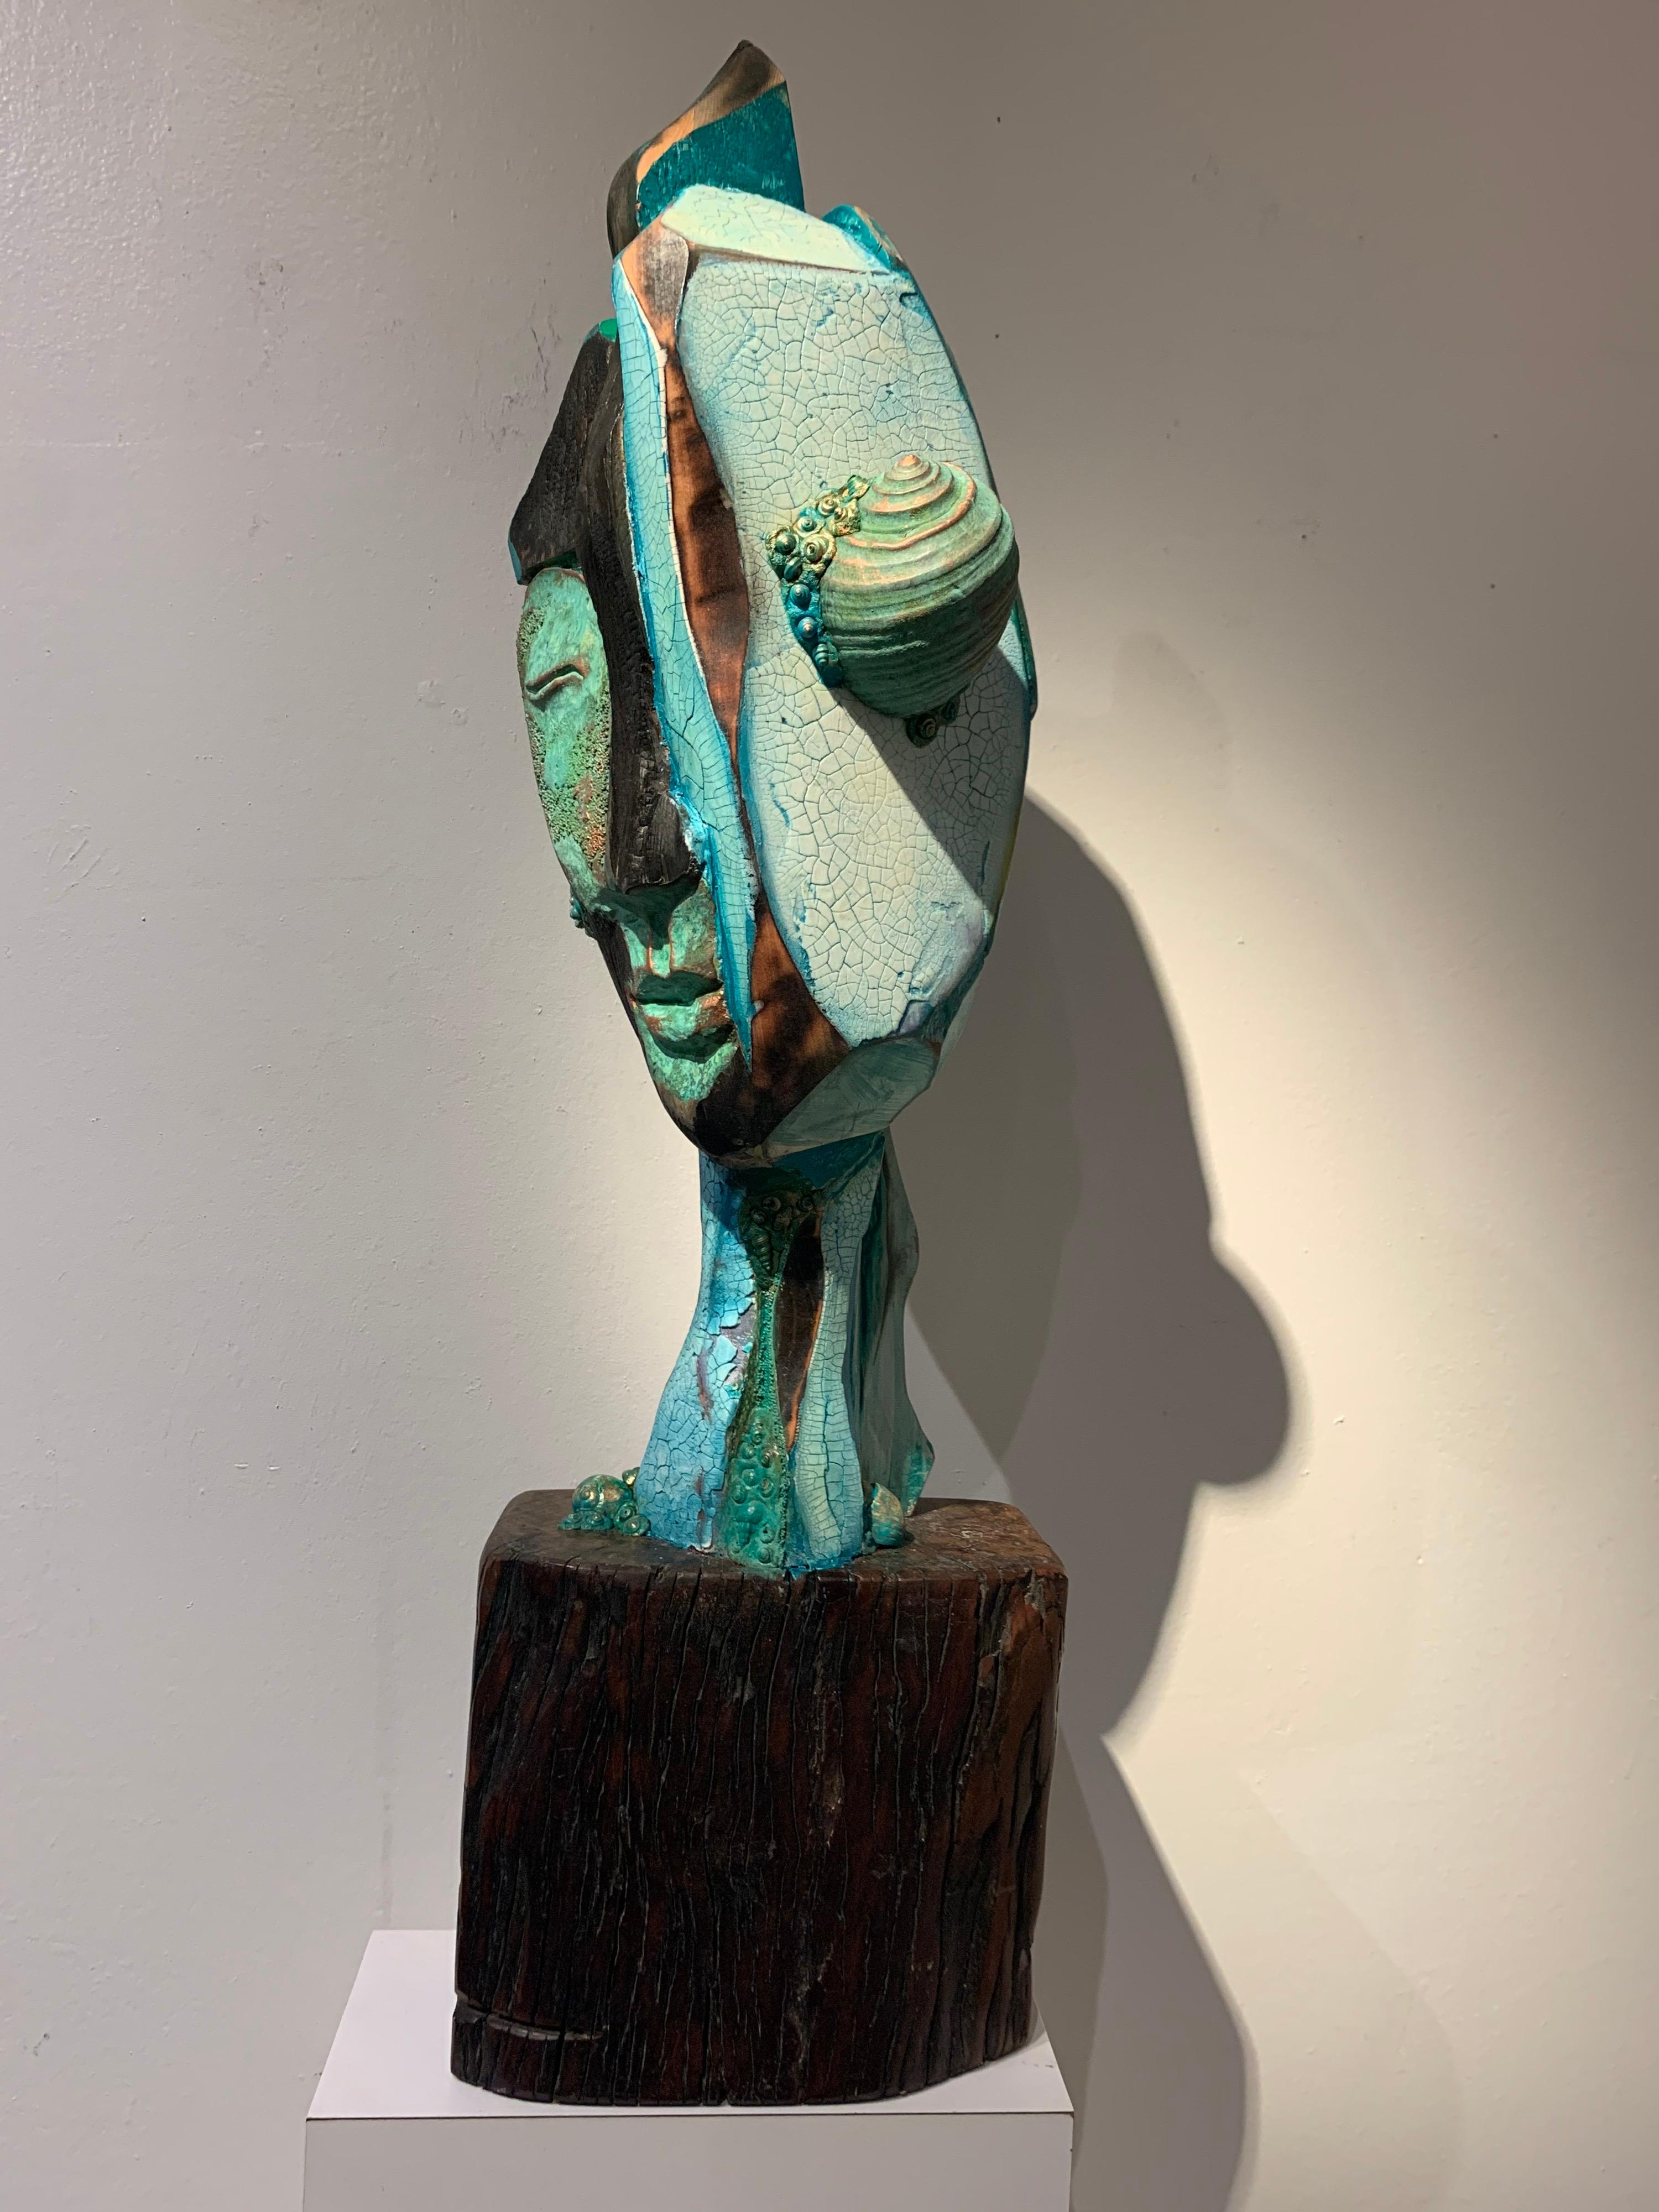 Chris Reilly Figurative Sculpture - Listening, wood, acrylic, mixed media sculpture, green, blue, off white, brown